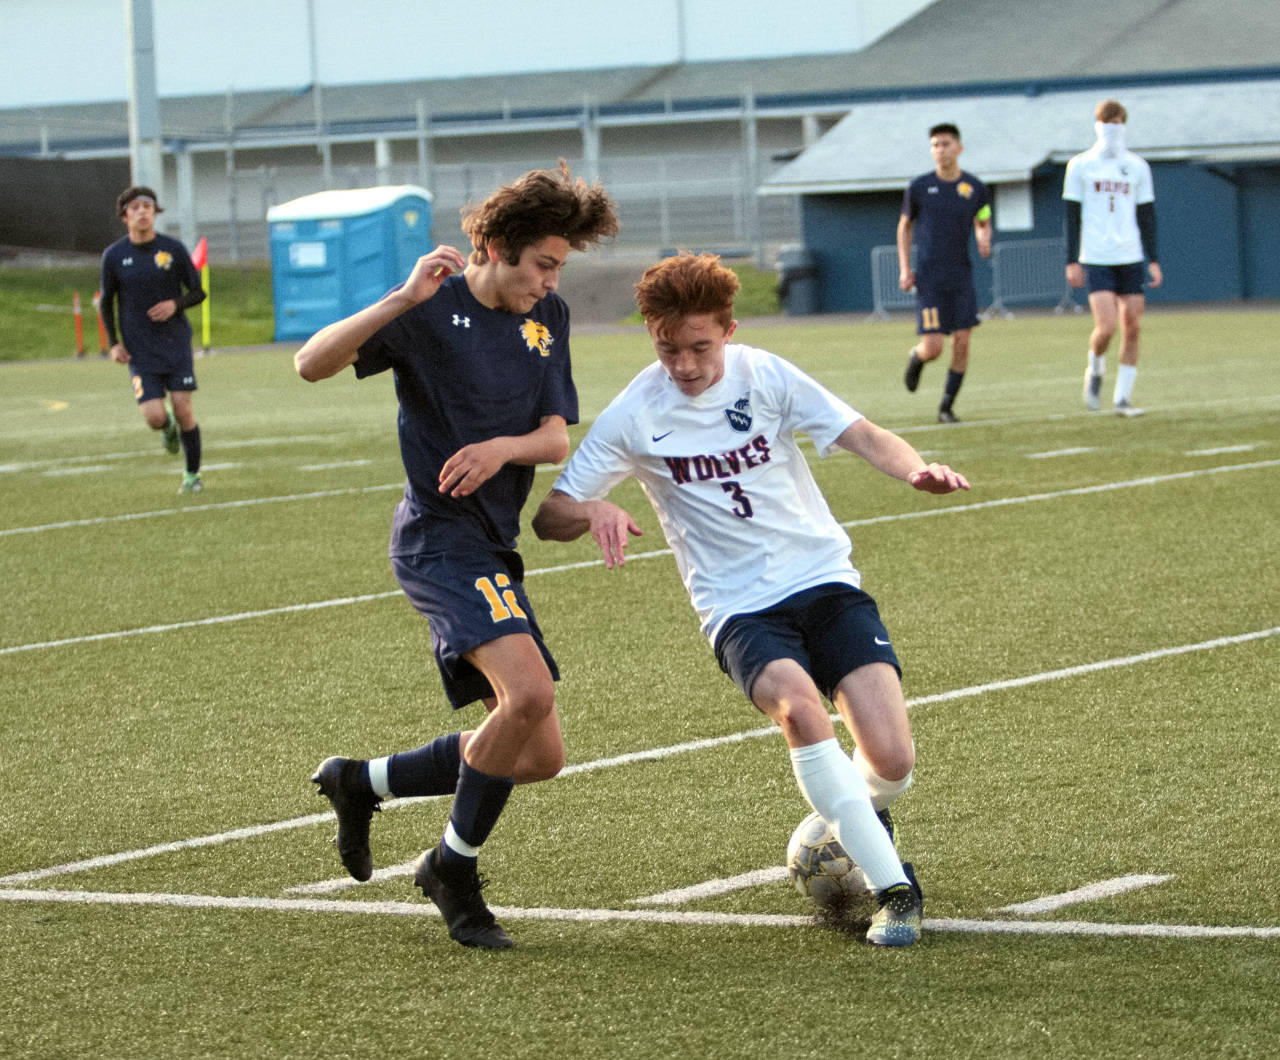 RYAN SPARKS | THE DAILY WORLD Aberdeen’s Carlos Mendoza (12) gets past Black Hills’ Zak Gilal during the first half of the Bobcats’ 4-0 win in a 2A District 4 Tournament game on Saturday at Stewart Field in Aberdeen.